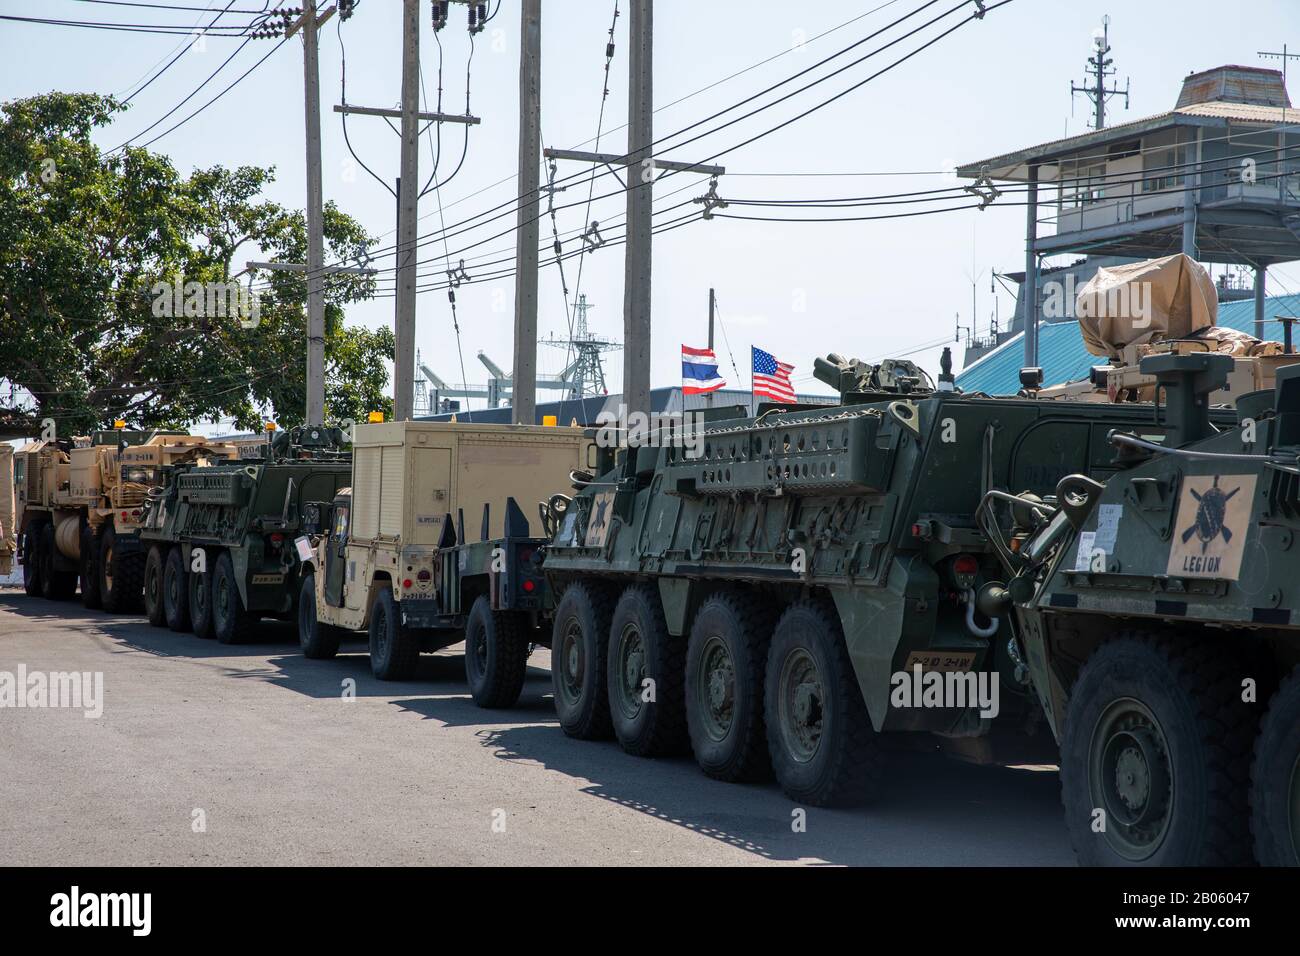 Soldiers from 2nd Infantry Brigade Combat Team, 25th Infantry Division, prepare military equipment and vehicles Feb. 17, 2020, at Chuk Samet, Thailand. Over 700 vehicles, containers and pieces of equipment were offloaded from Maritime Sealift Command M/V Cape Hudson (T-AKR 5066) in support of exercise Cobra Gold 20 and movements aligning with U.S. Army Pacific's program, 'Pacific Pathways,' in explaining Army's engagement in the Pacific region. Stock Photo